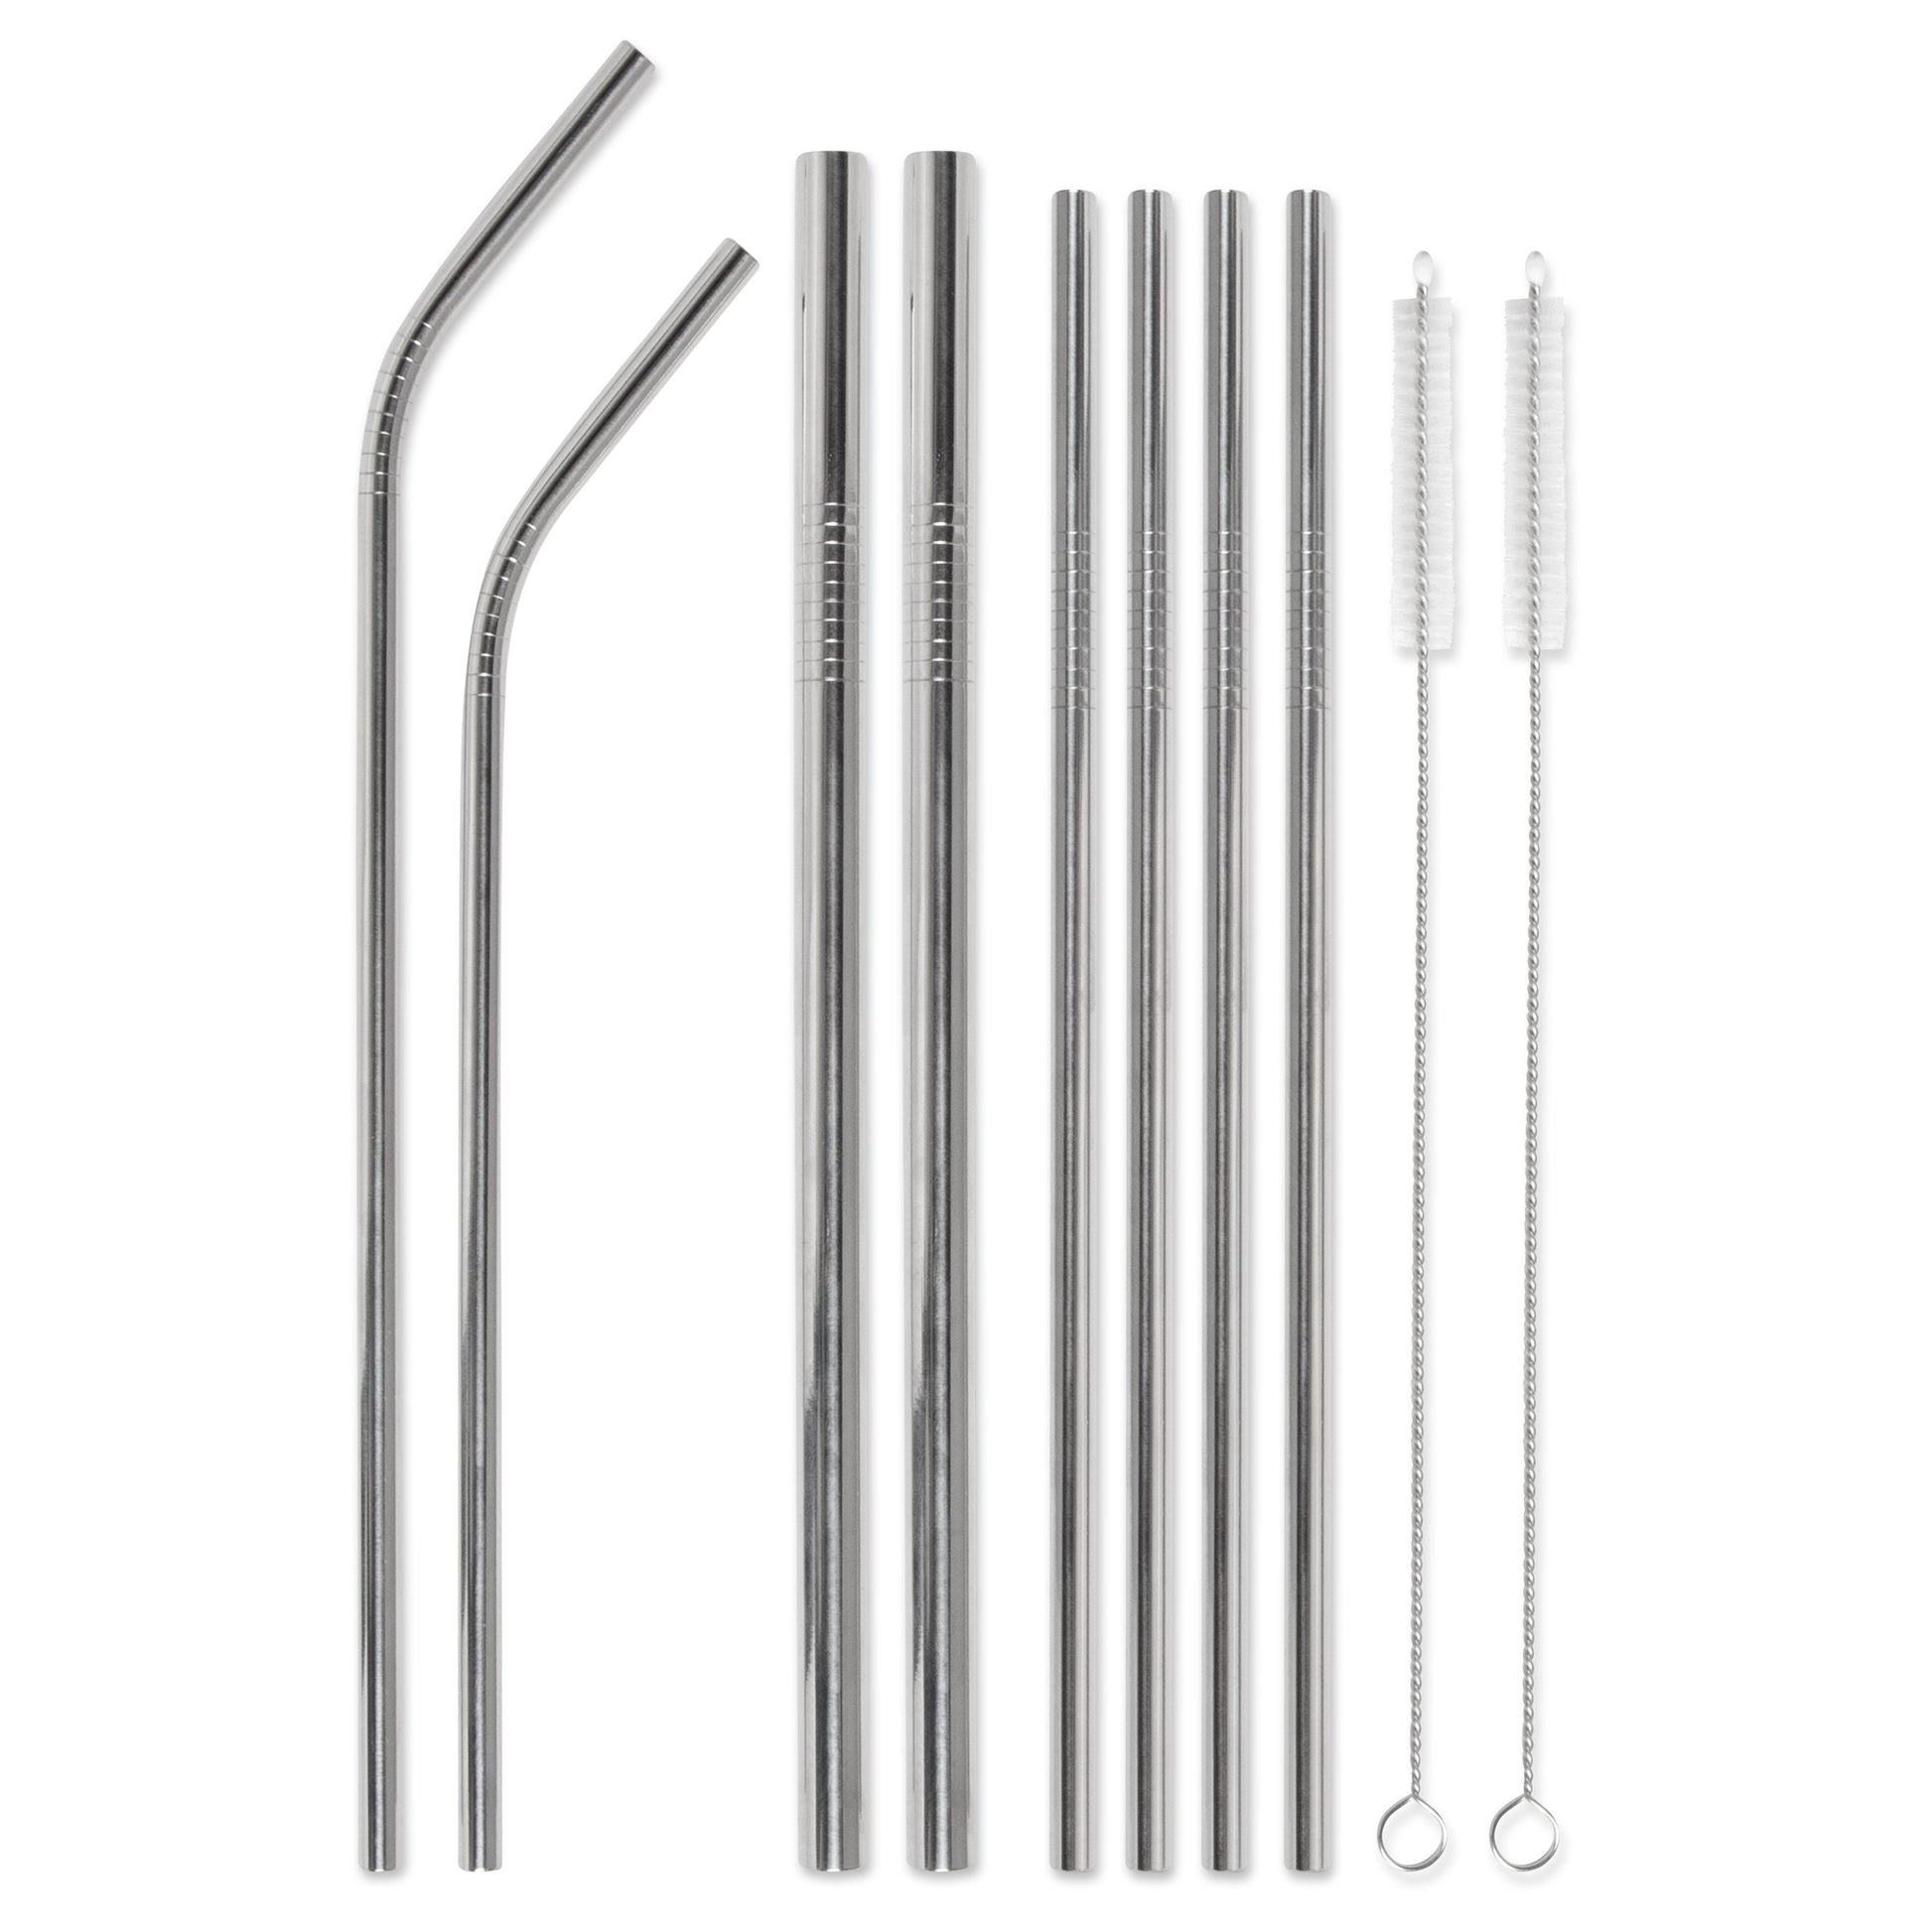 Stainless Steel Straw Set - This Is The Last Straw (You'll Ever Buy)